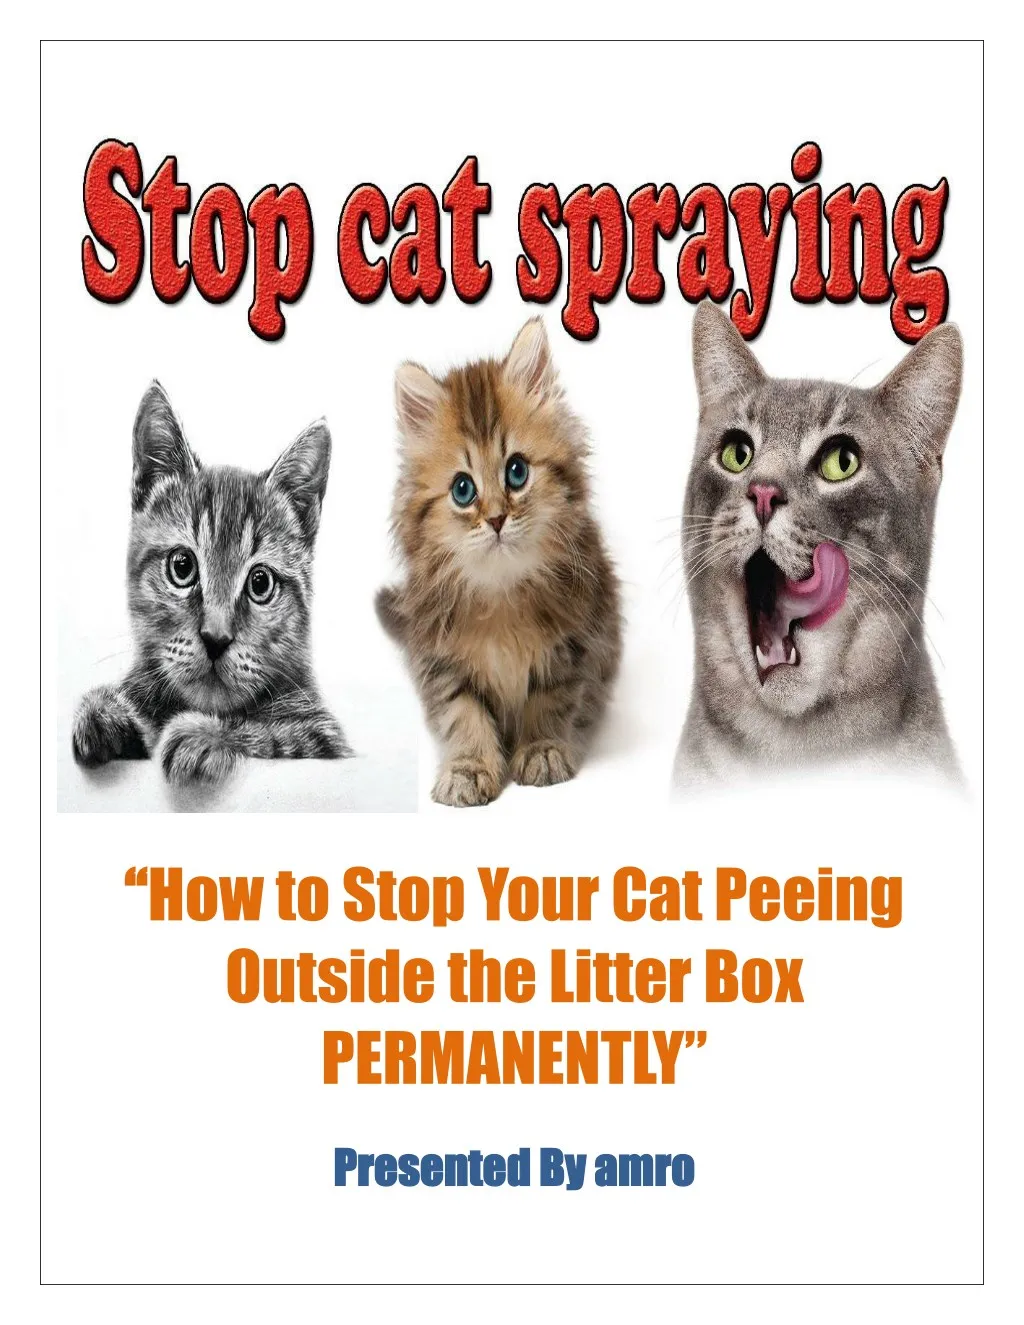 how to stop your cat peeing outside the litter